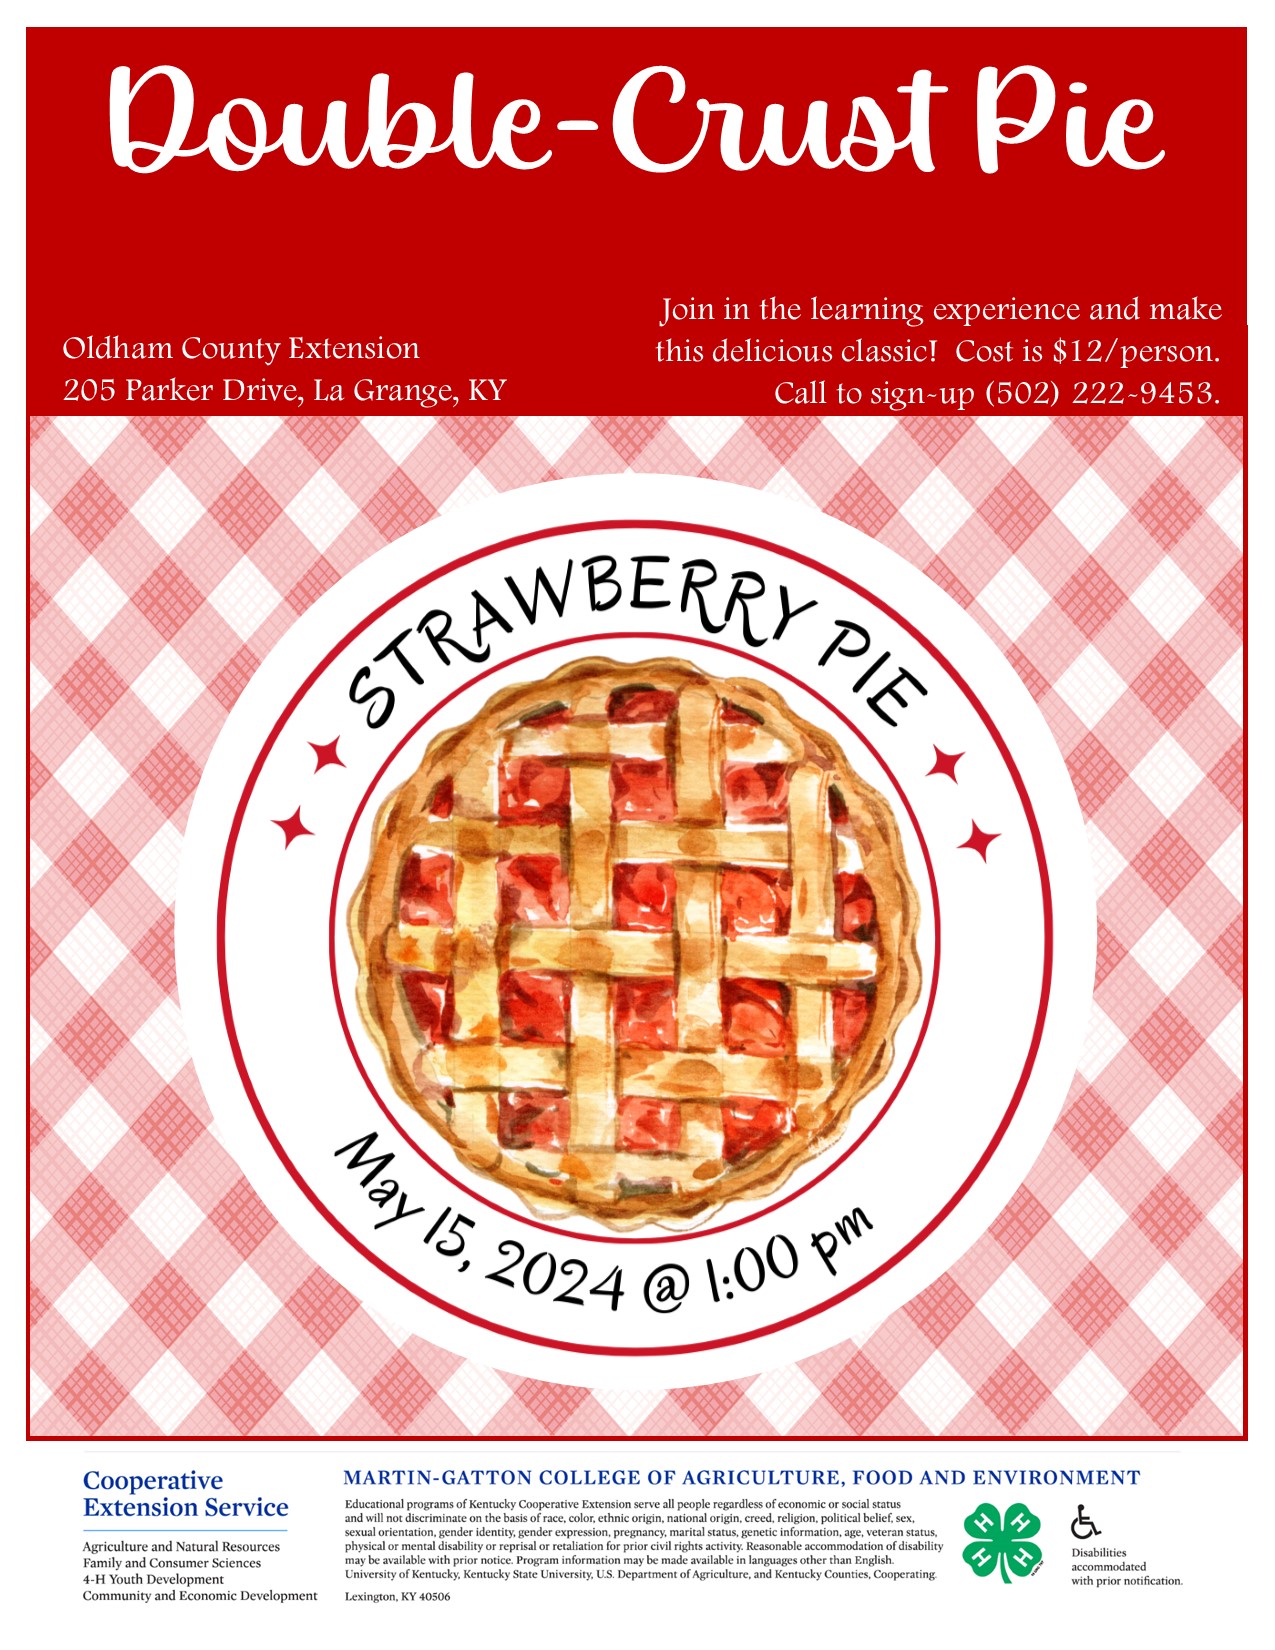 Strawberry pie with red gingham background